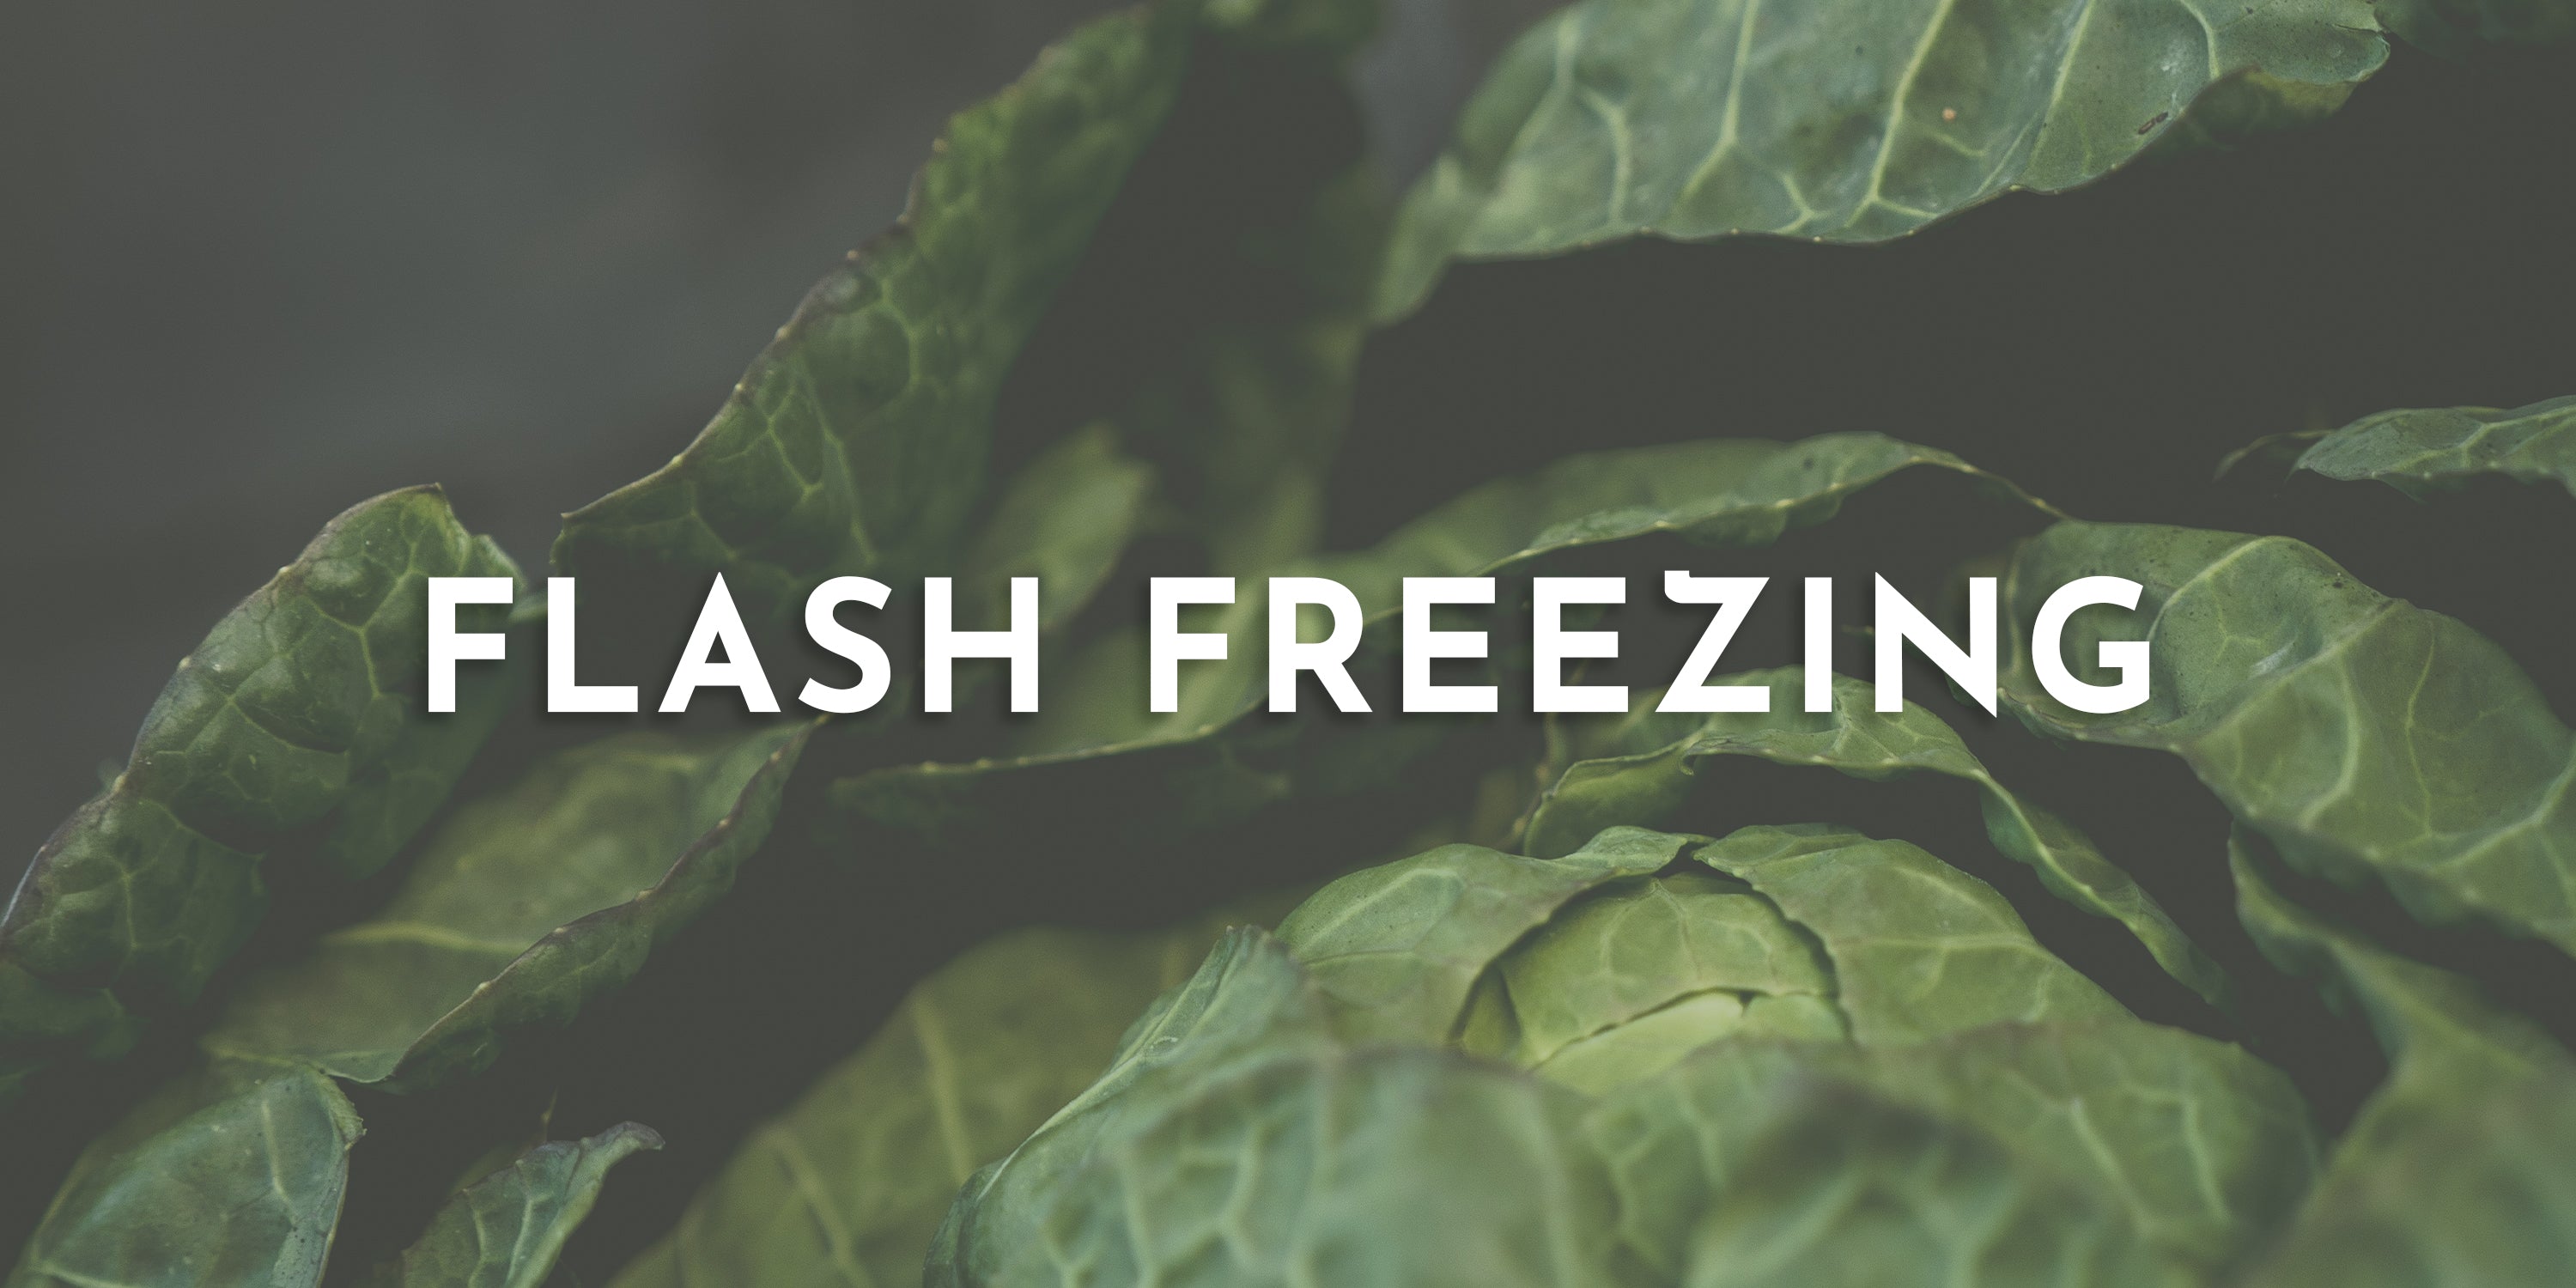 How to Flash Freeze Vegetables